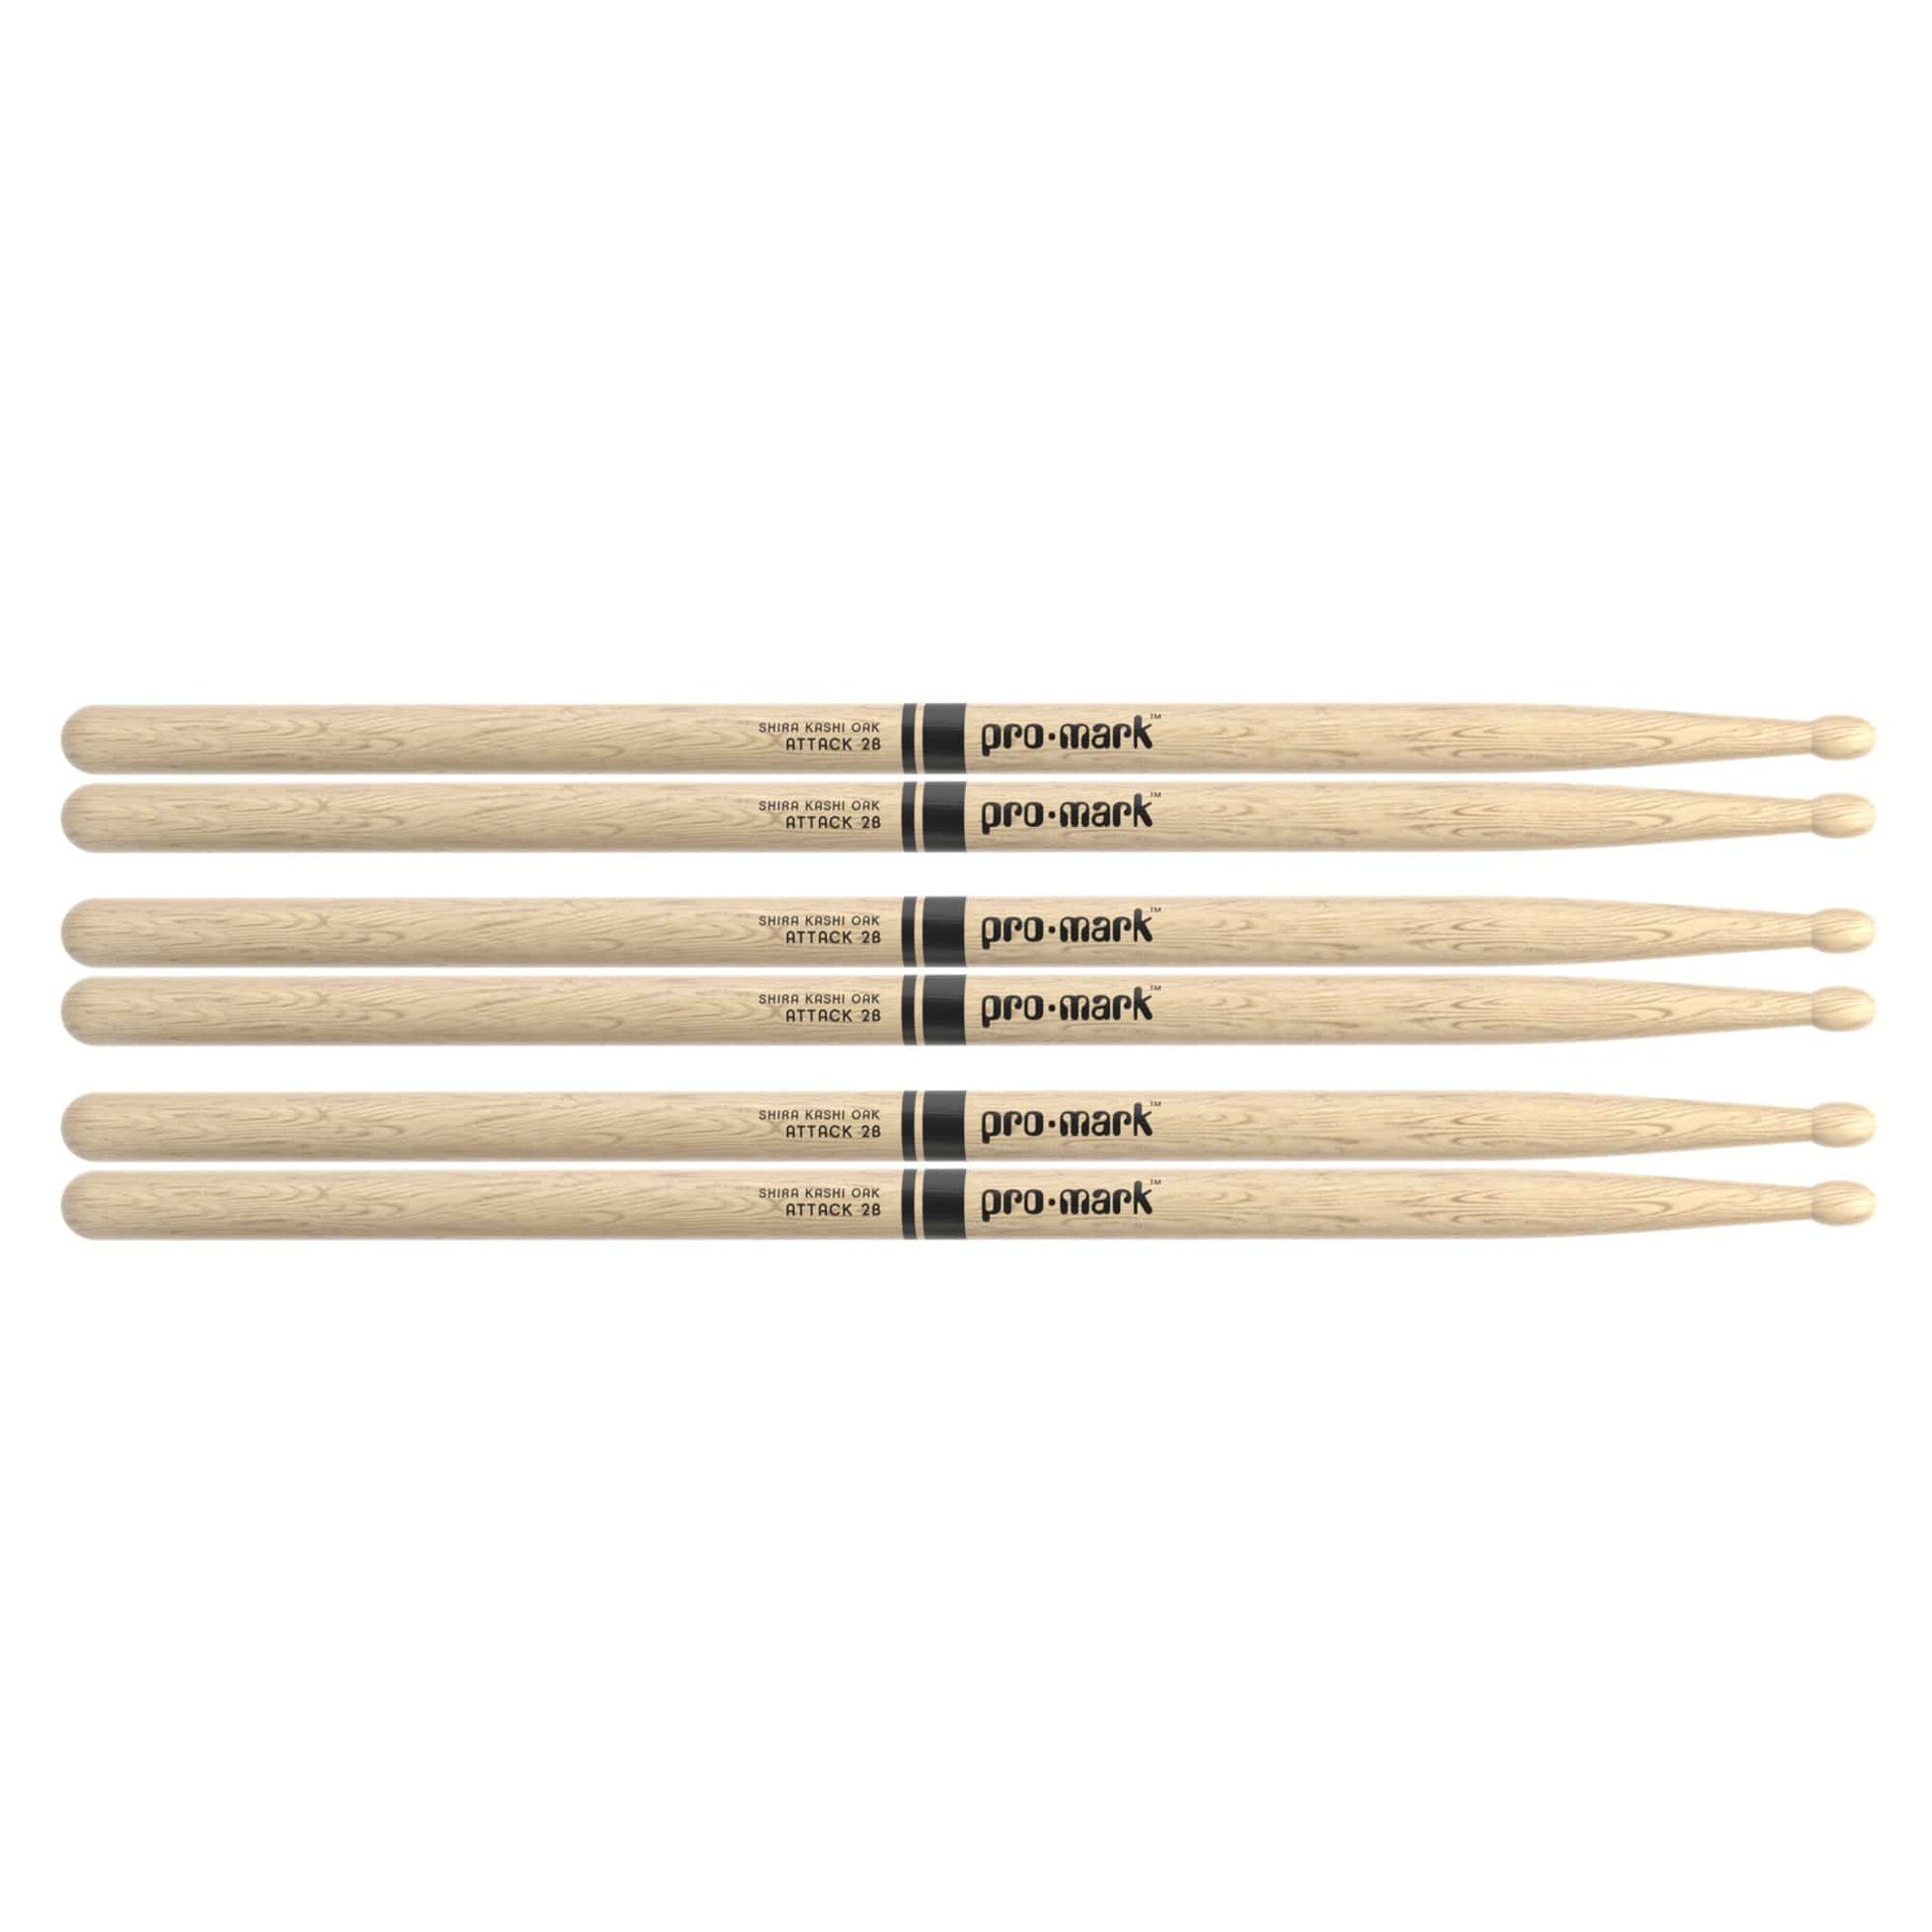 Promark Japanese White Oak 2B Wood Tip Drum Sticks (3 Pair Bundle) Drums and Percussion / Parts and Accessories / Drum Sticks and Mallets